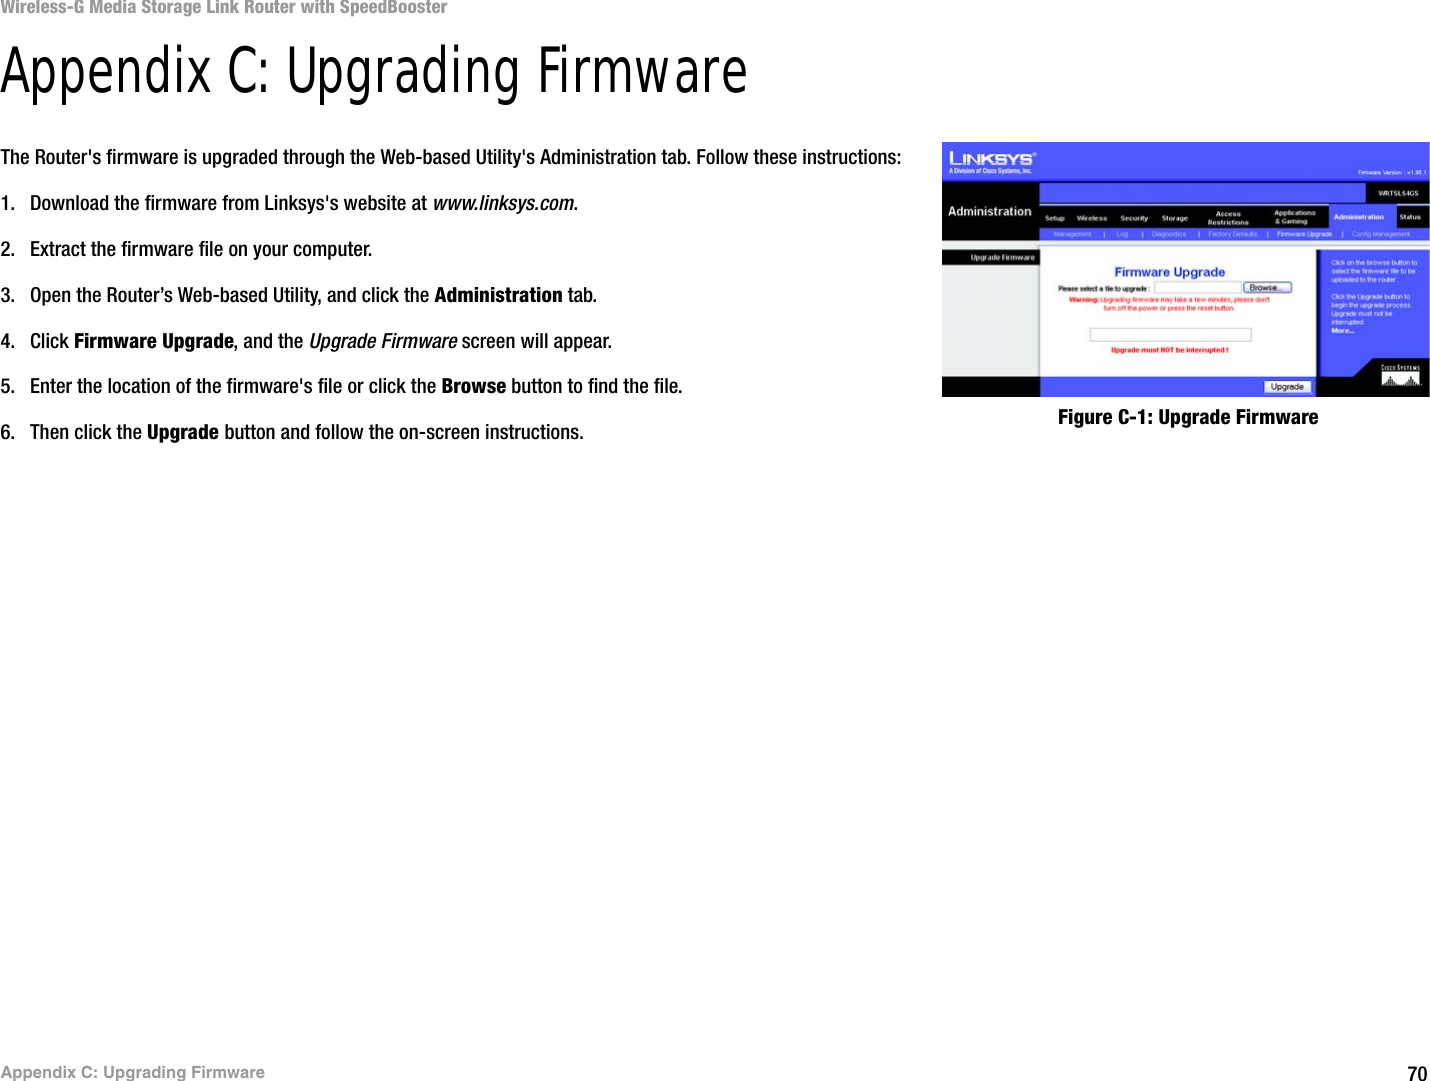 70Appendix C: Upgrading FirmwareWireless-G Media Storage Link Router with SpeedBoosterAppendix C: Upgrading FirmwareThe Router&apos;s firmware is upgraded through the Web-based Utility&apos;s Administration tab. Follow these instructions:1. Download the firmware from Linksys&apos;s website at www.linksys.com.2. Extract the firmware file on your computer.3. Open the Router’s Web-based Utility, and click the Administration tab.4. Click Firmware Upgrade, and the Upgrade Firmware screen will appear.5. Enter the location of the firmware&apos;s file or click the Browse button to find the file.6. Then click the Upgrade button and follow the on-screen instructions. Figure C-1: Upgrade Firmware